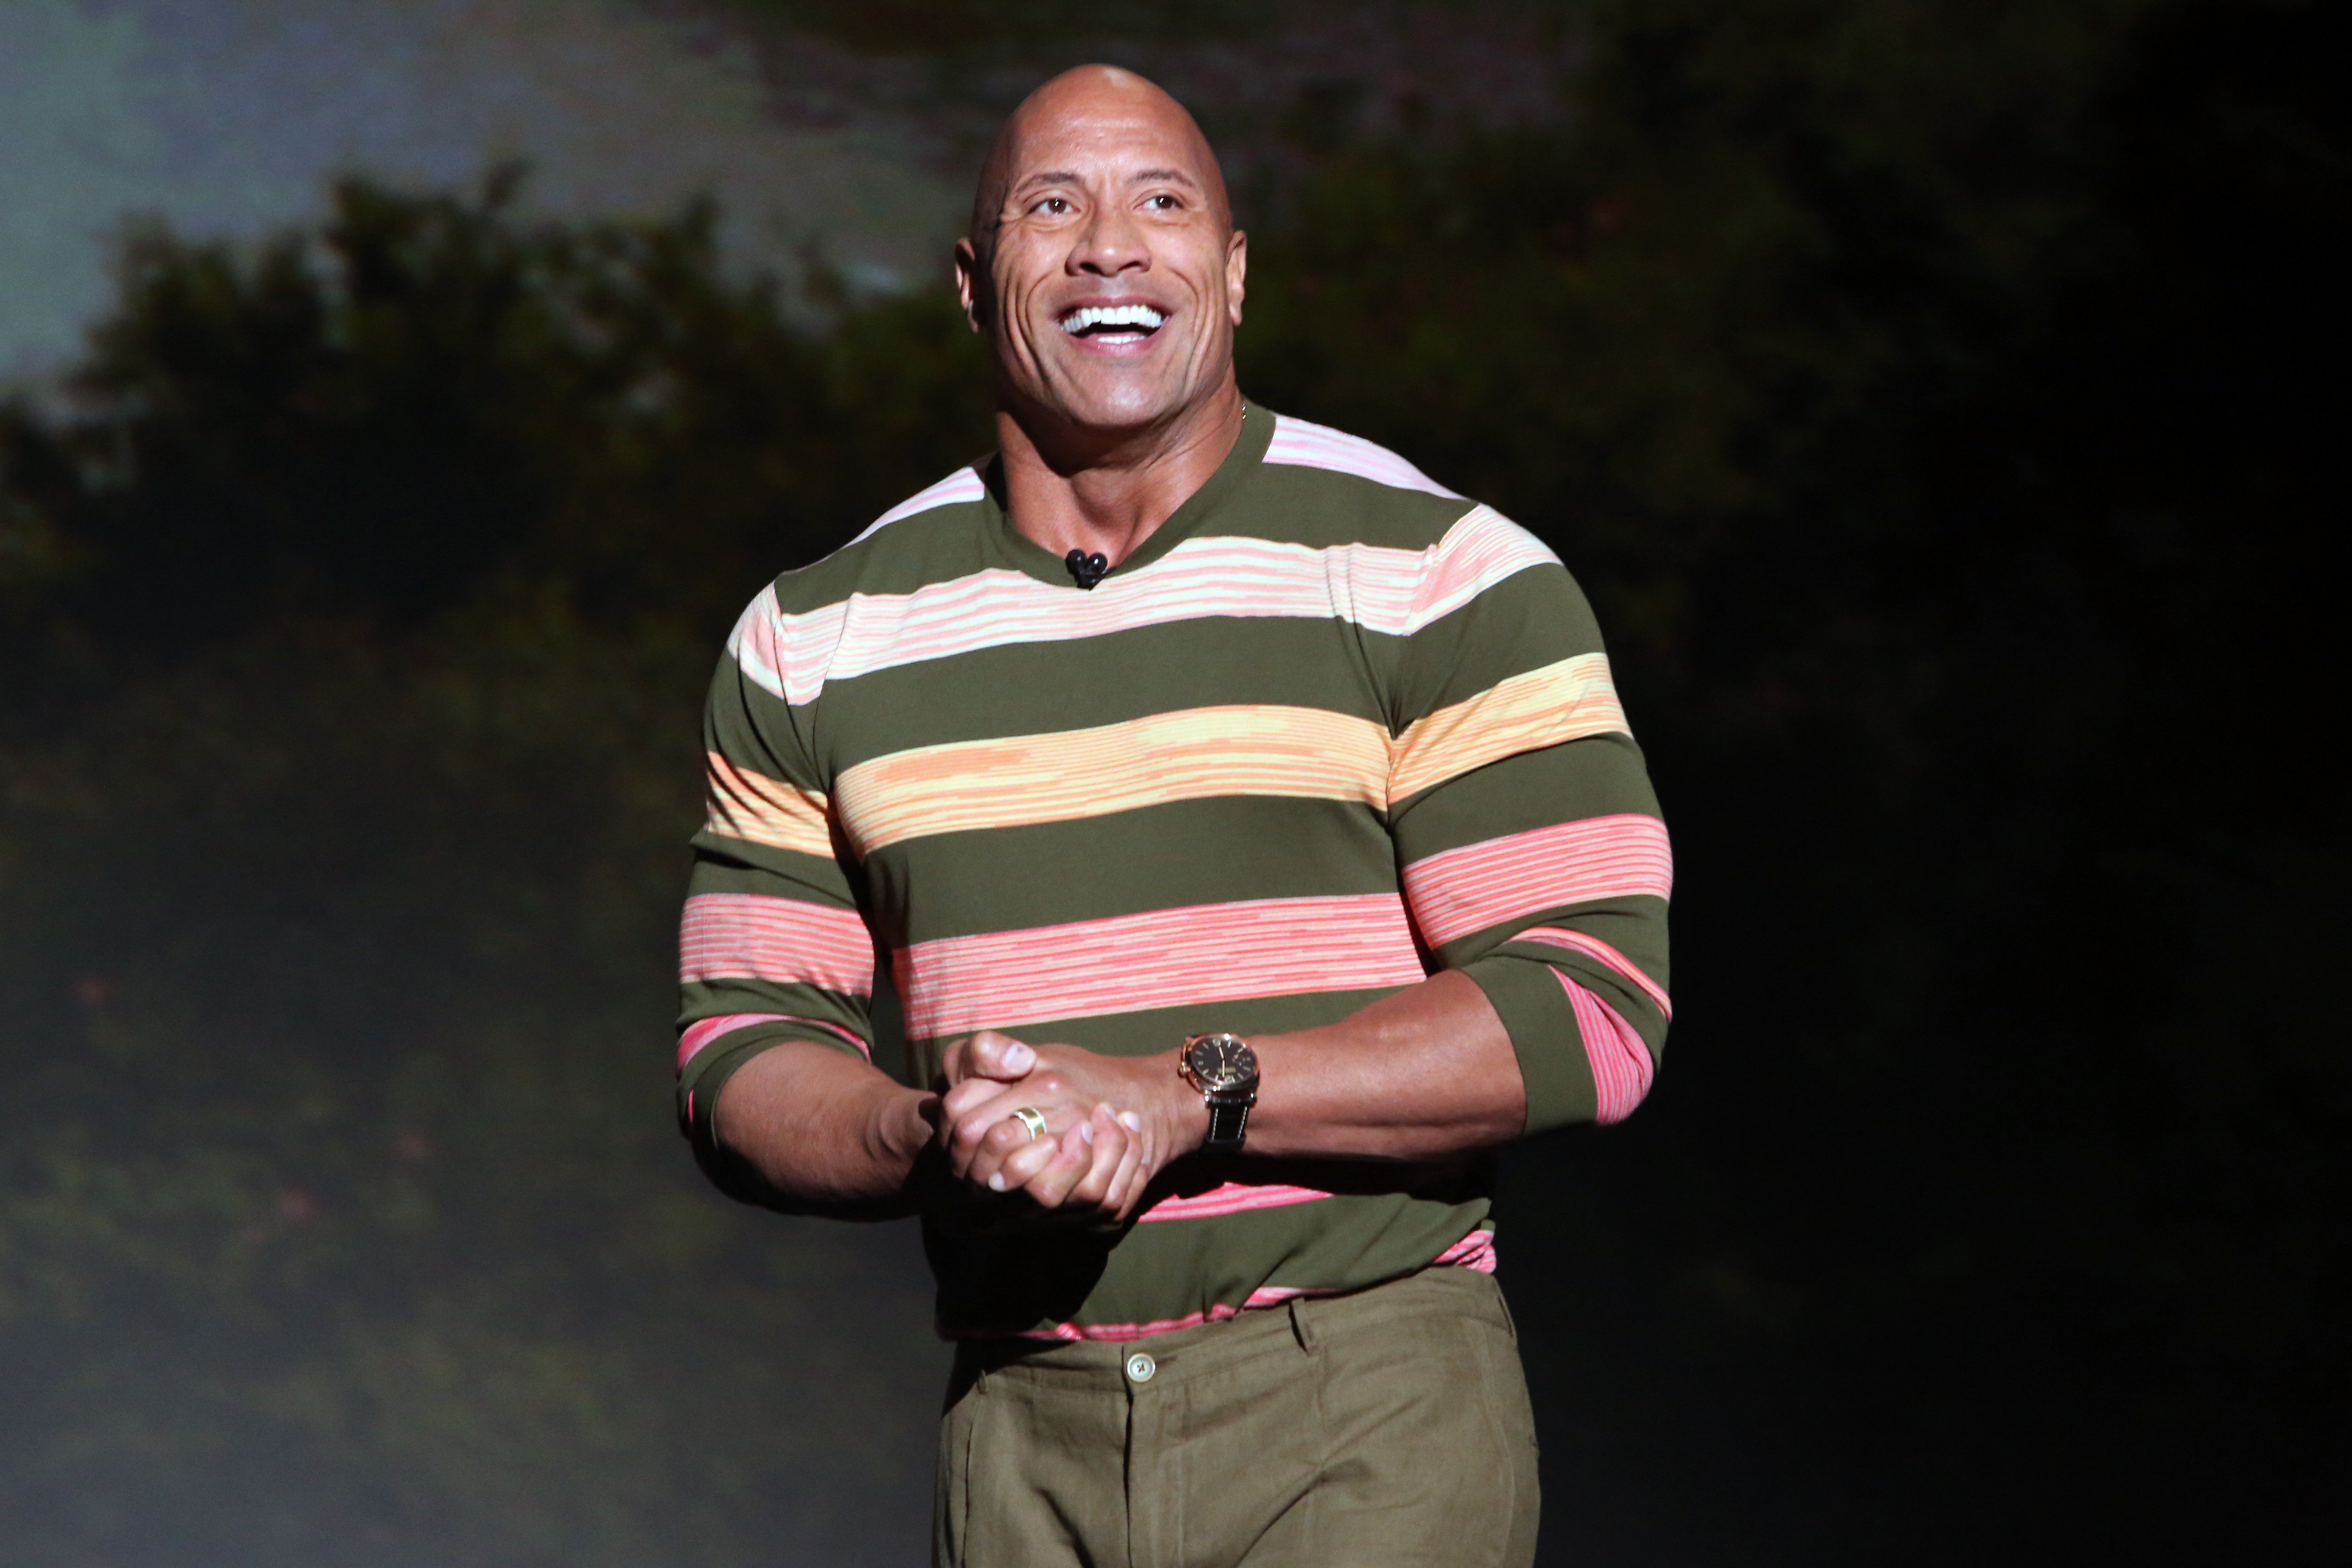 Dwayne Johnson at a Disney event in August 2019. | Photo: Getty Images